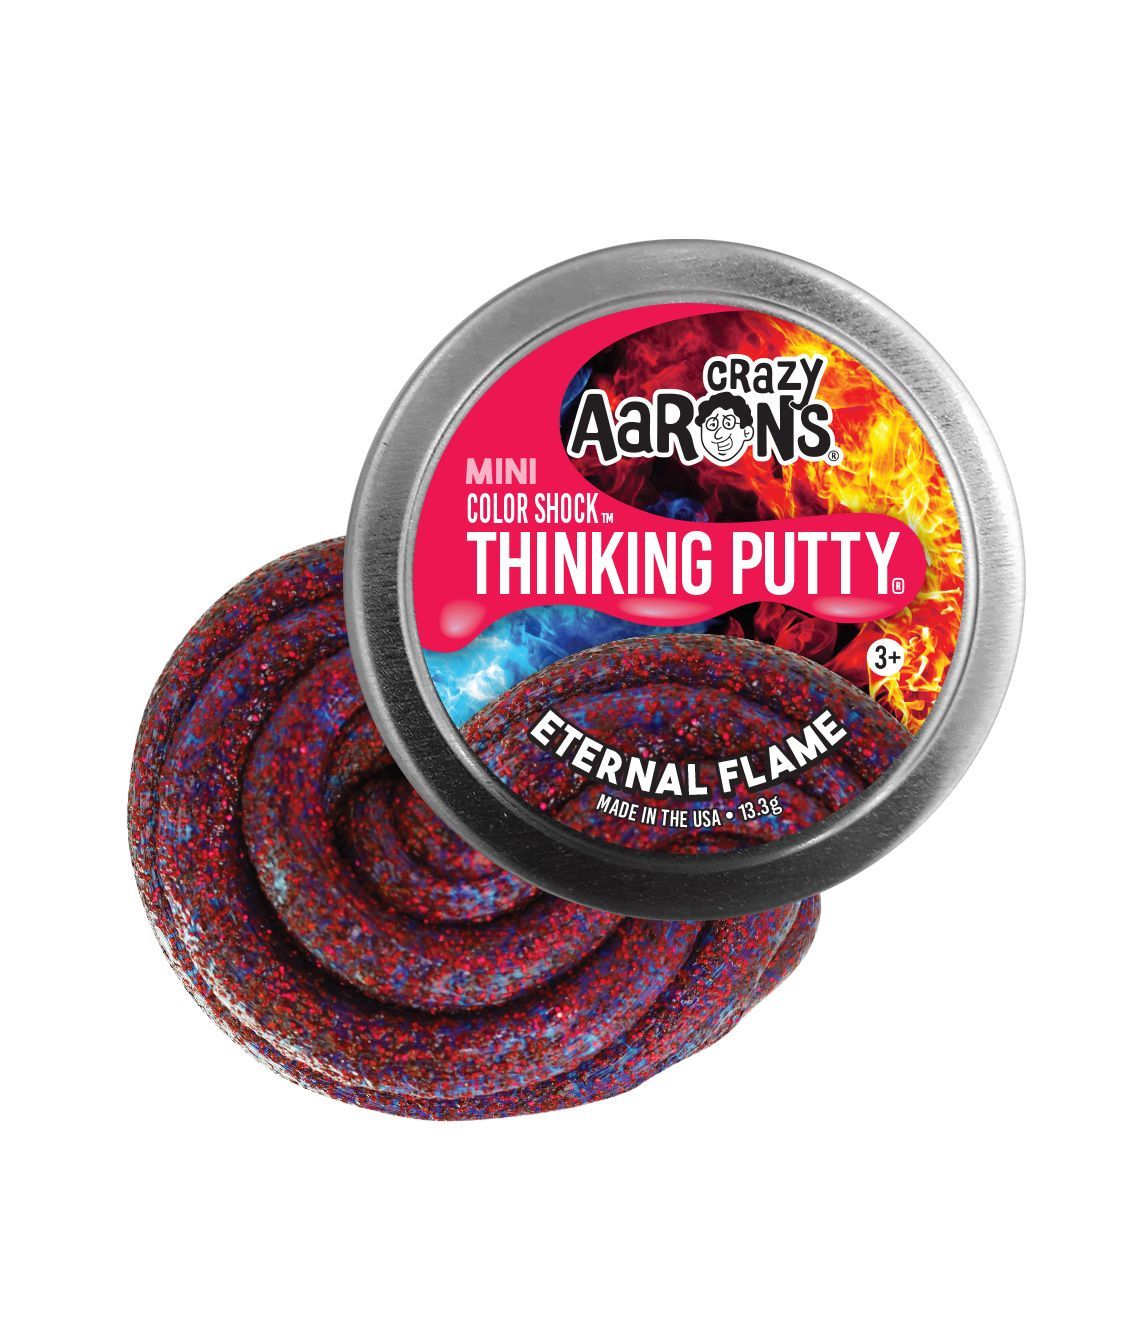 Eternal Flame Putty 2'' Tin Thinking Putty by Crazy Aaron’s